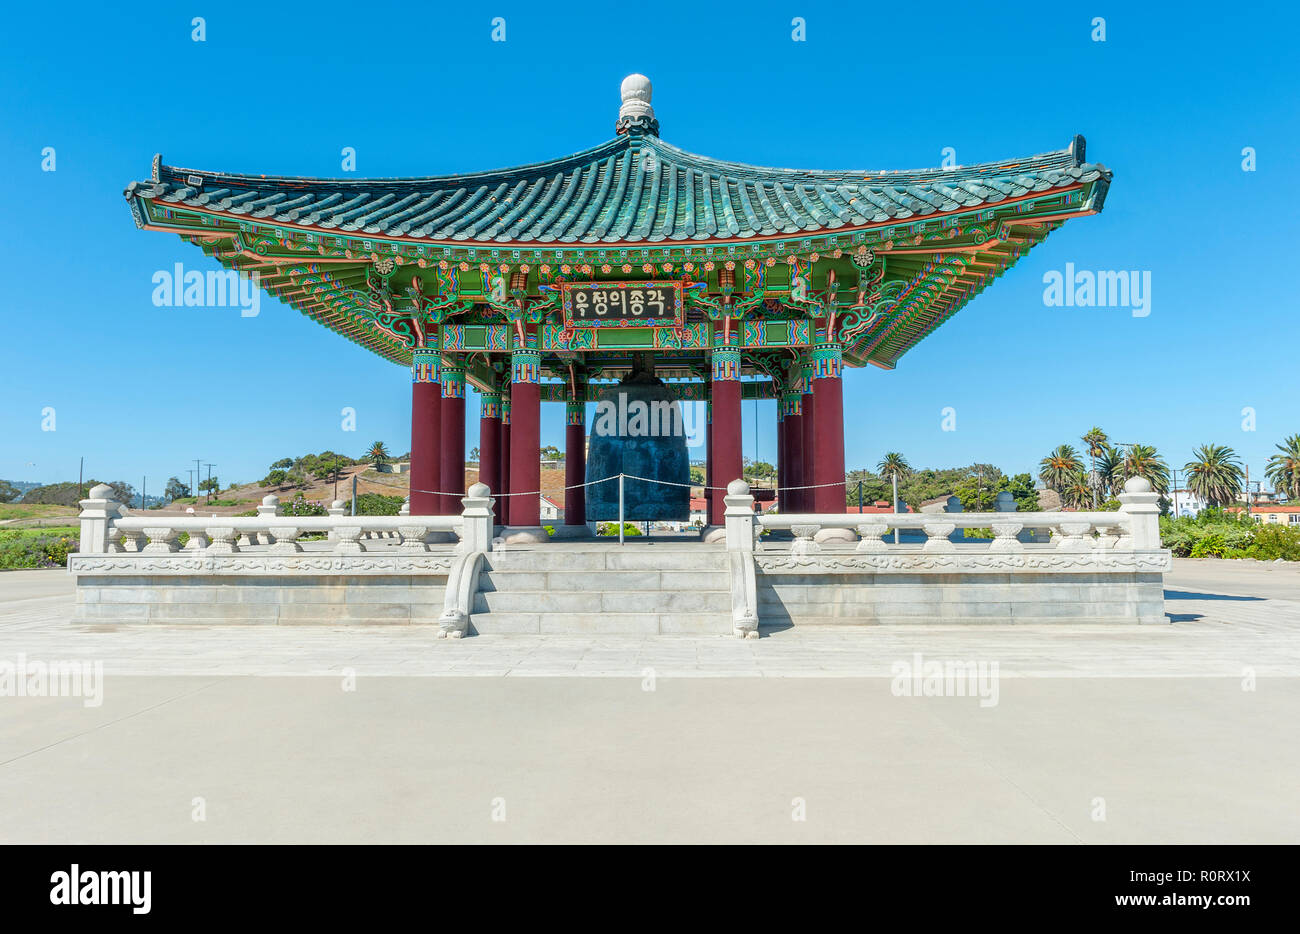 The Korean Bell of Friendship is a massive bronze bell housed in a stone pavilion in Angel's Gate Park, in the San Pedro neighborhood of Los Angeles. Stock Photo